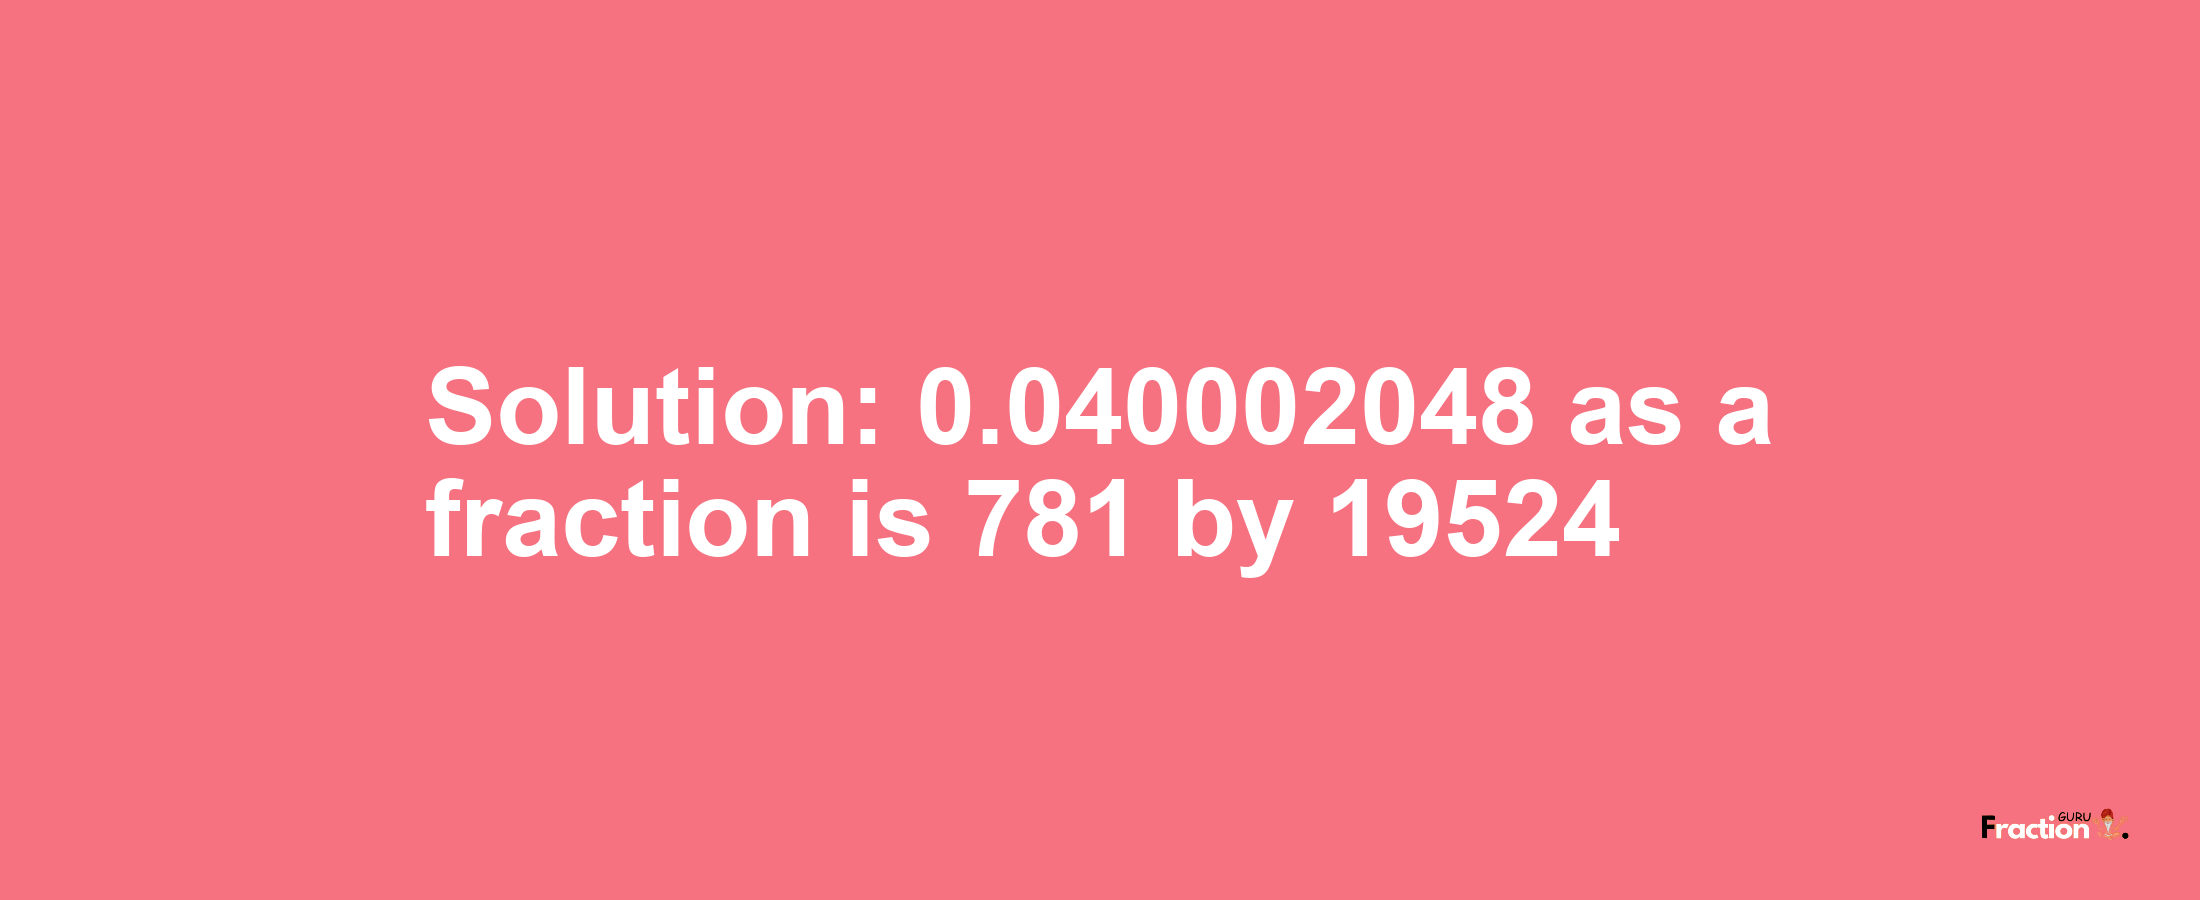 Solution:0.040002048 as a fraction is 781/19524